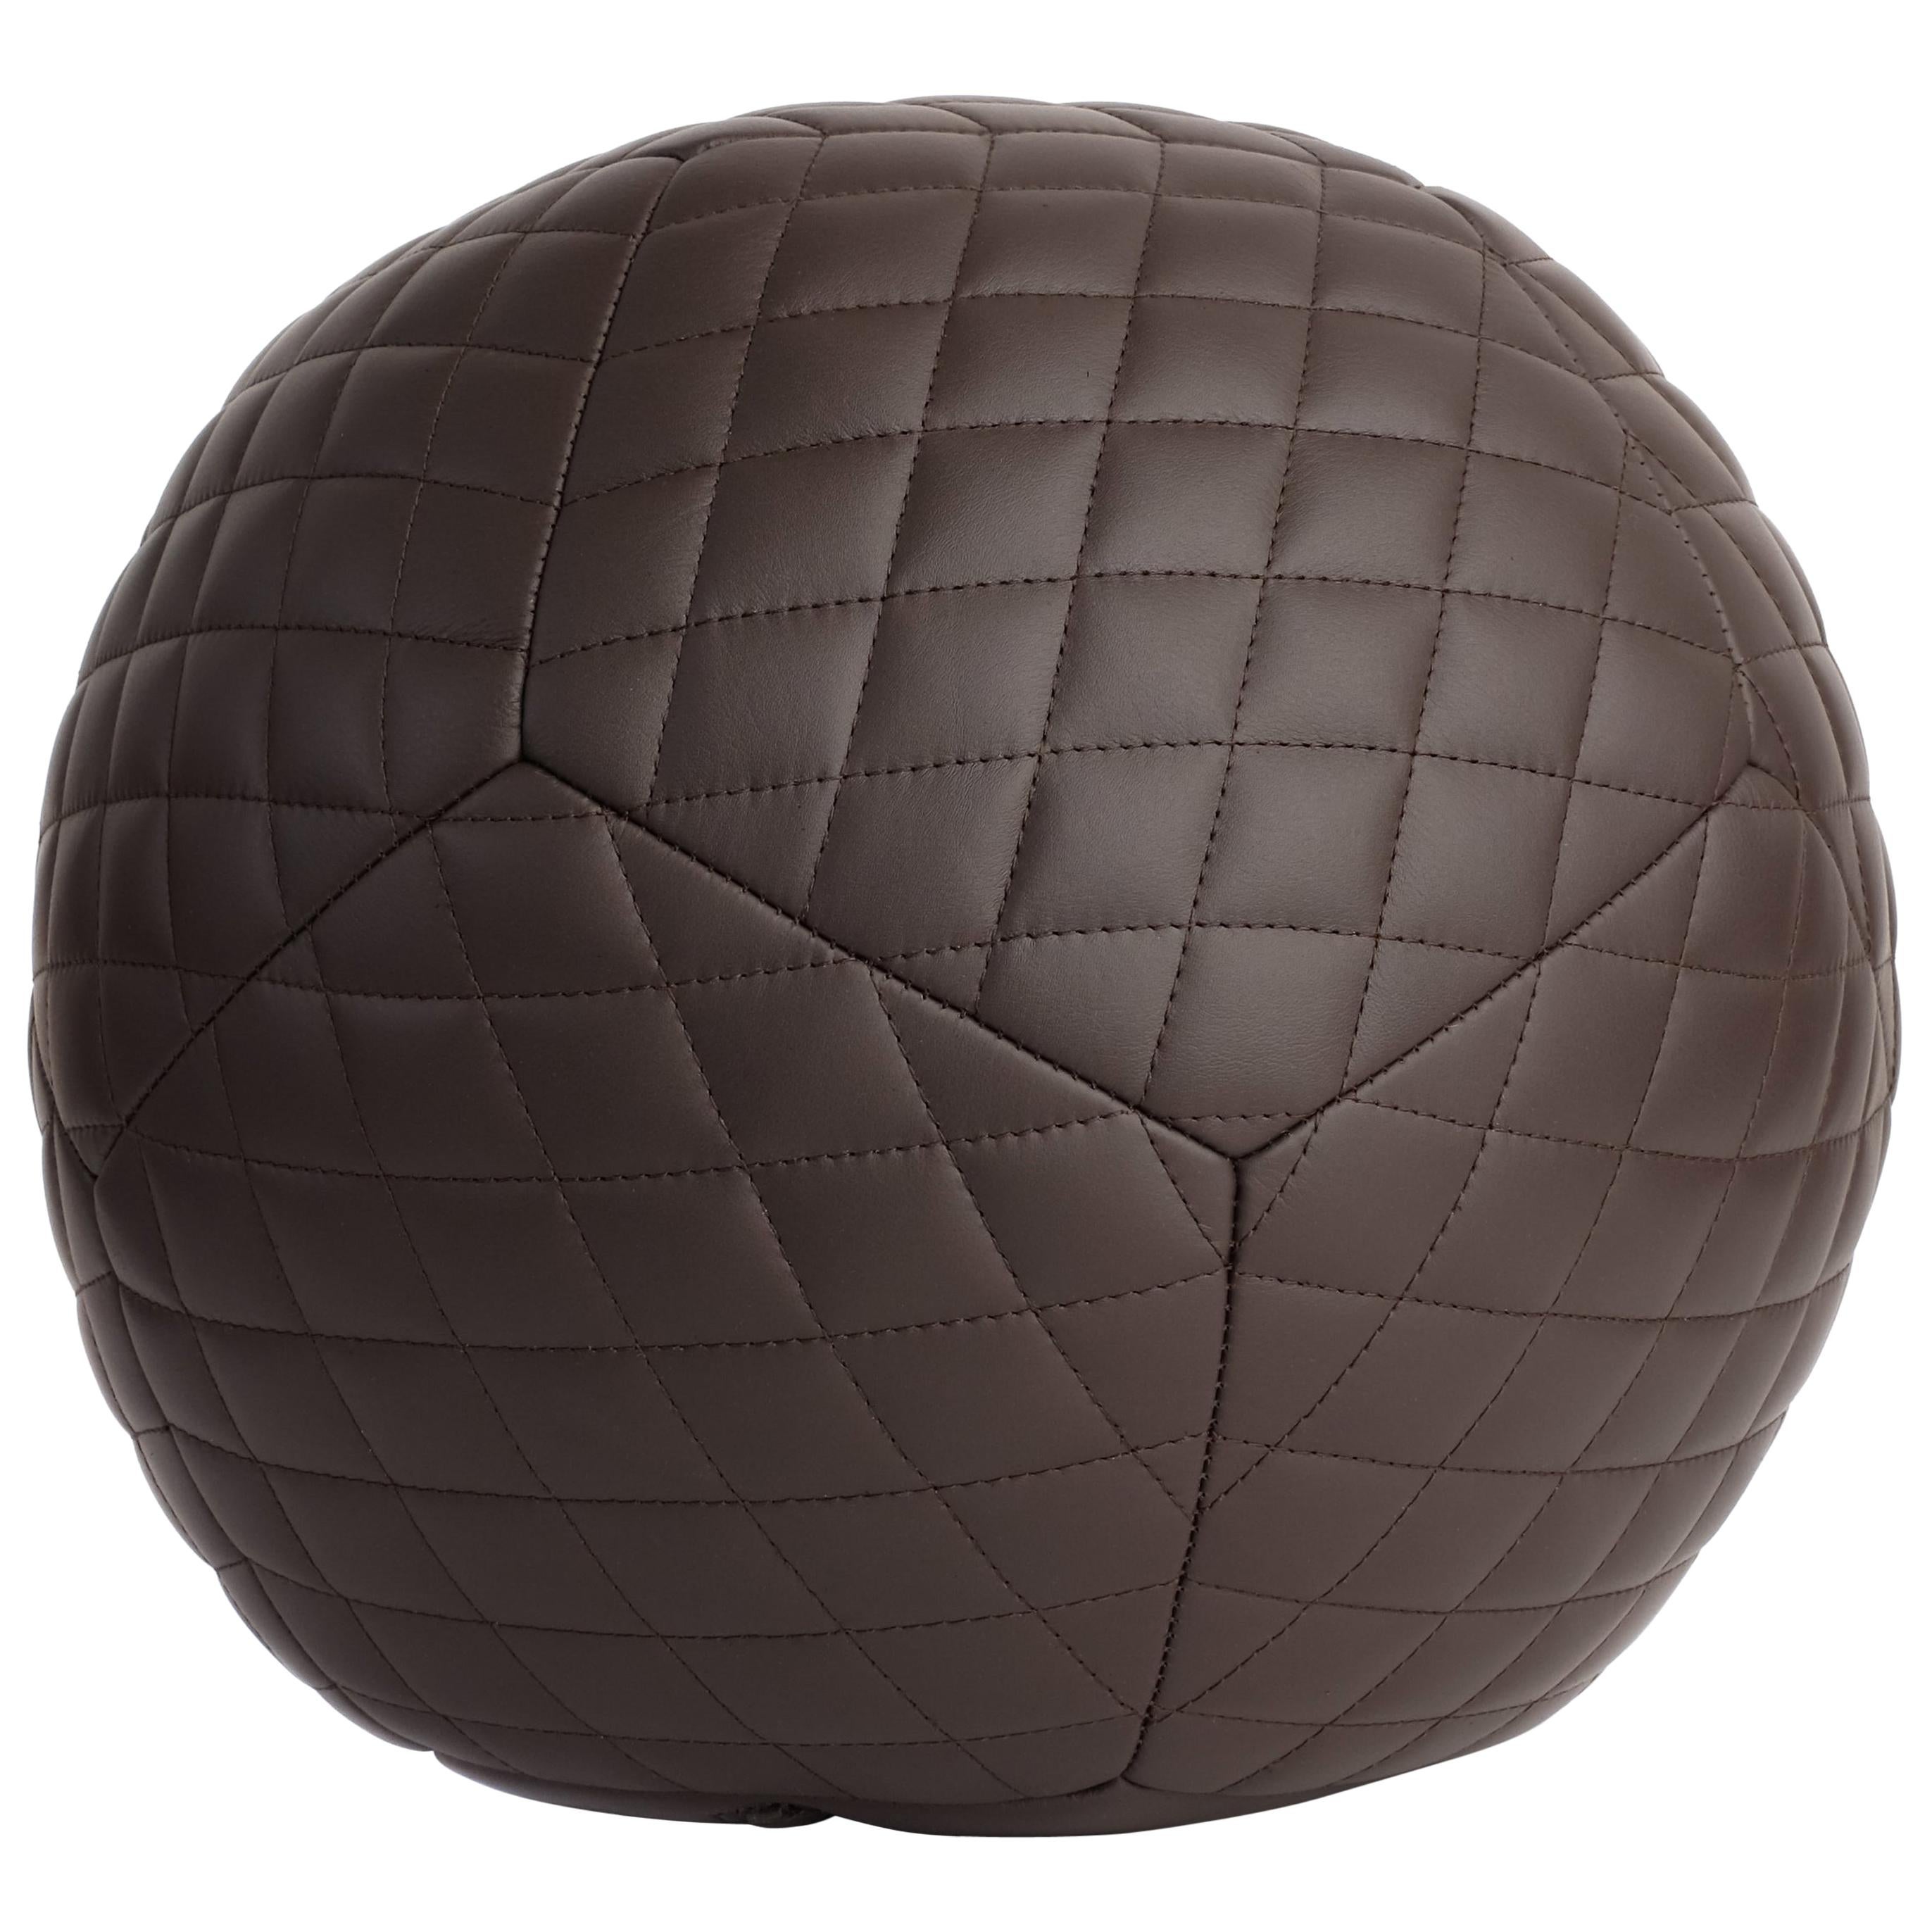 Diamond Ottoman 22" in Chocolate Brown Leather by Moses Nadel For Sale